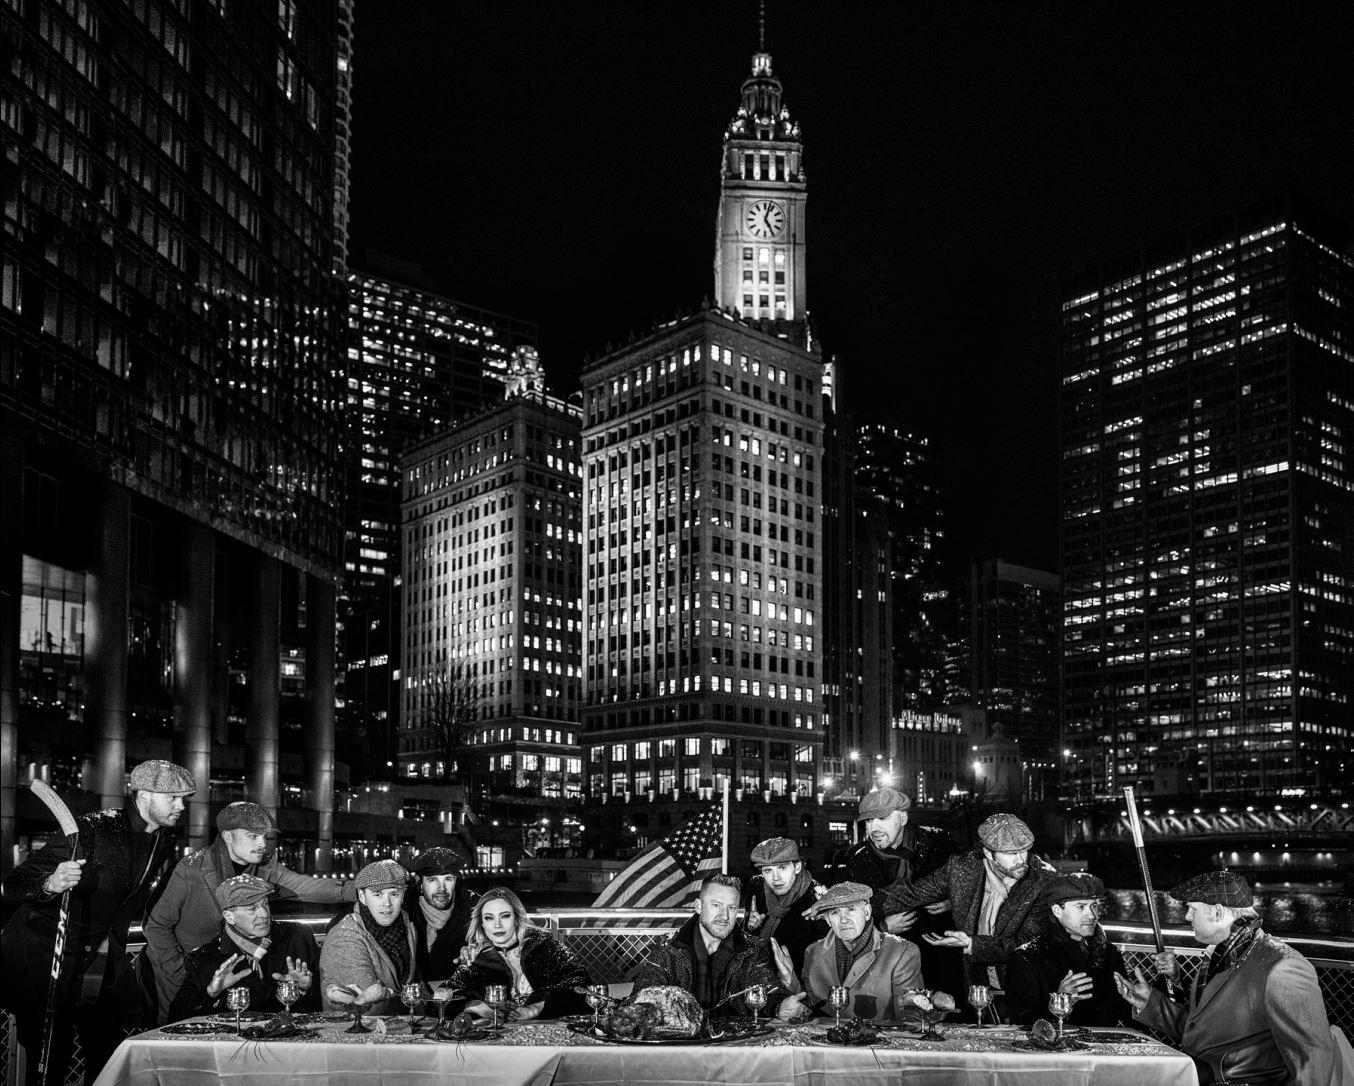 The Last Supper in Chicago - Chicago skyline and Blackhawks players sitting down